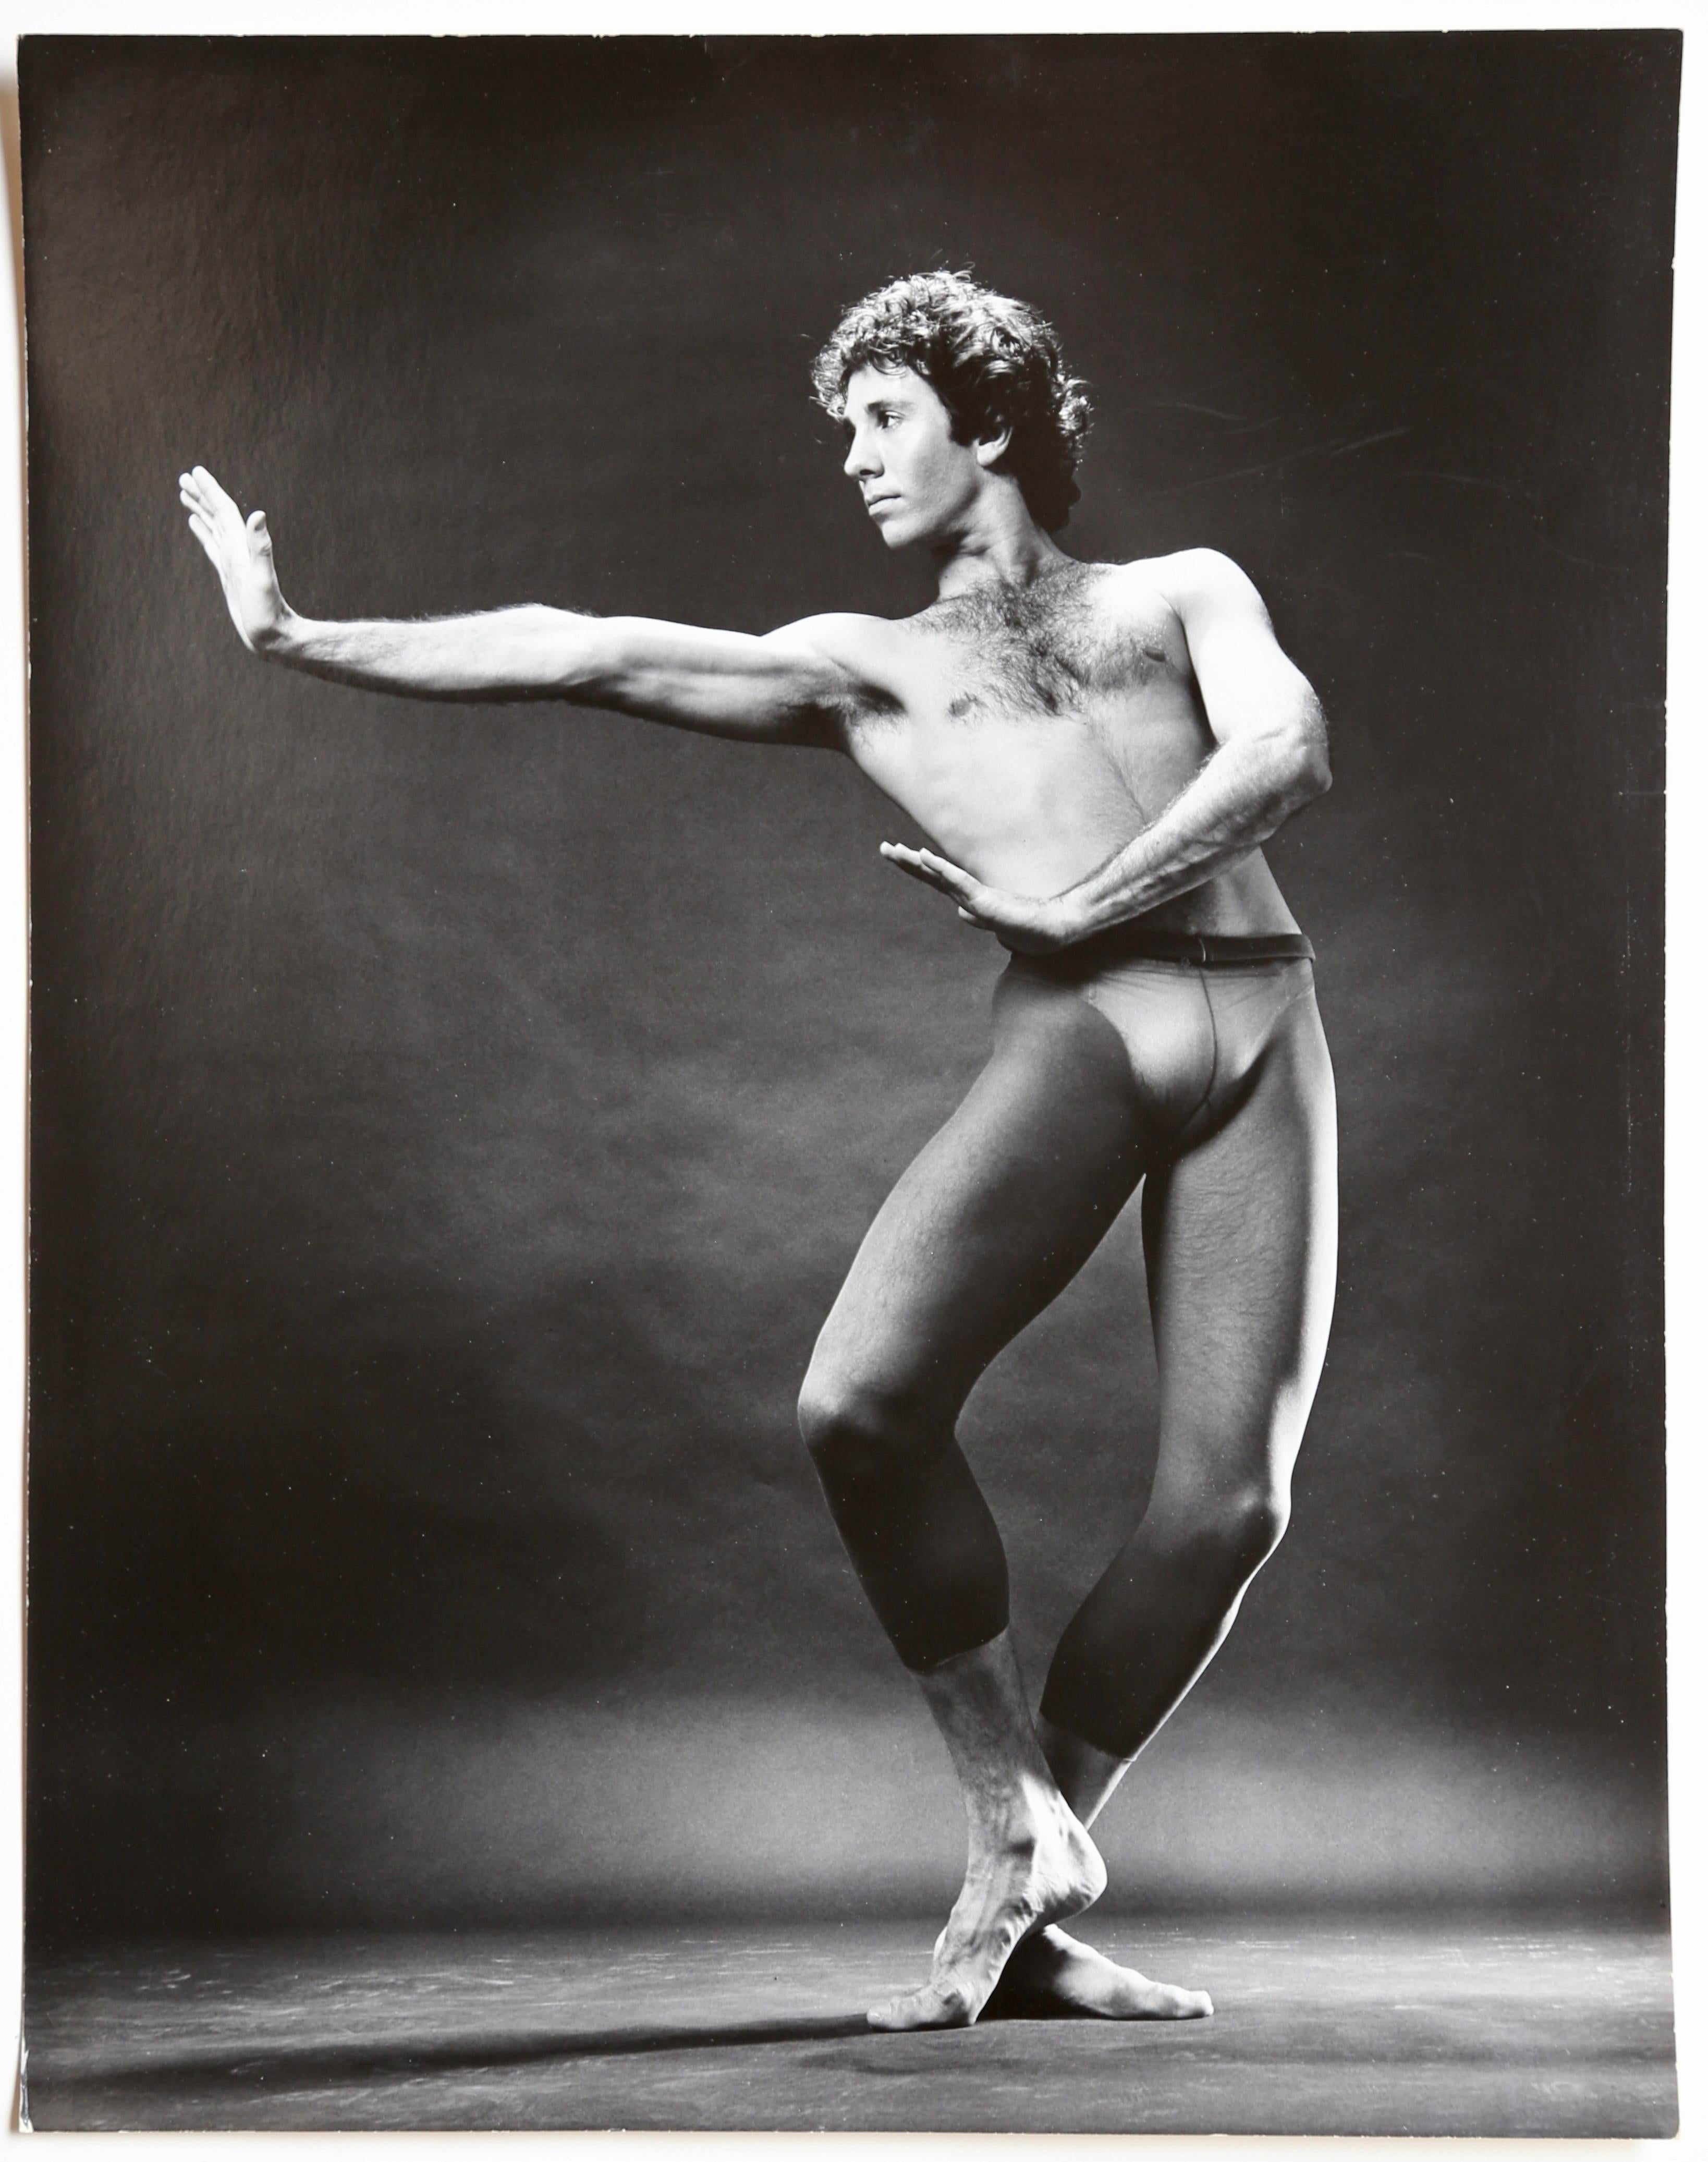 Jack Mitchell mid-20th Century photograph of international ballet dancer Jan Nyuts in 1977. Nyuts was a highly acclaimed principal dancer who performed with Nederlands Dans Theatre, Maurice Bejart, San Francisco Ballet, London's The Royal Ballet,